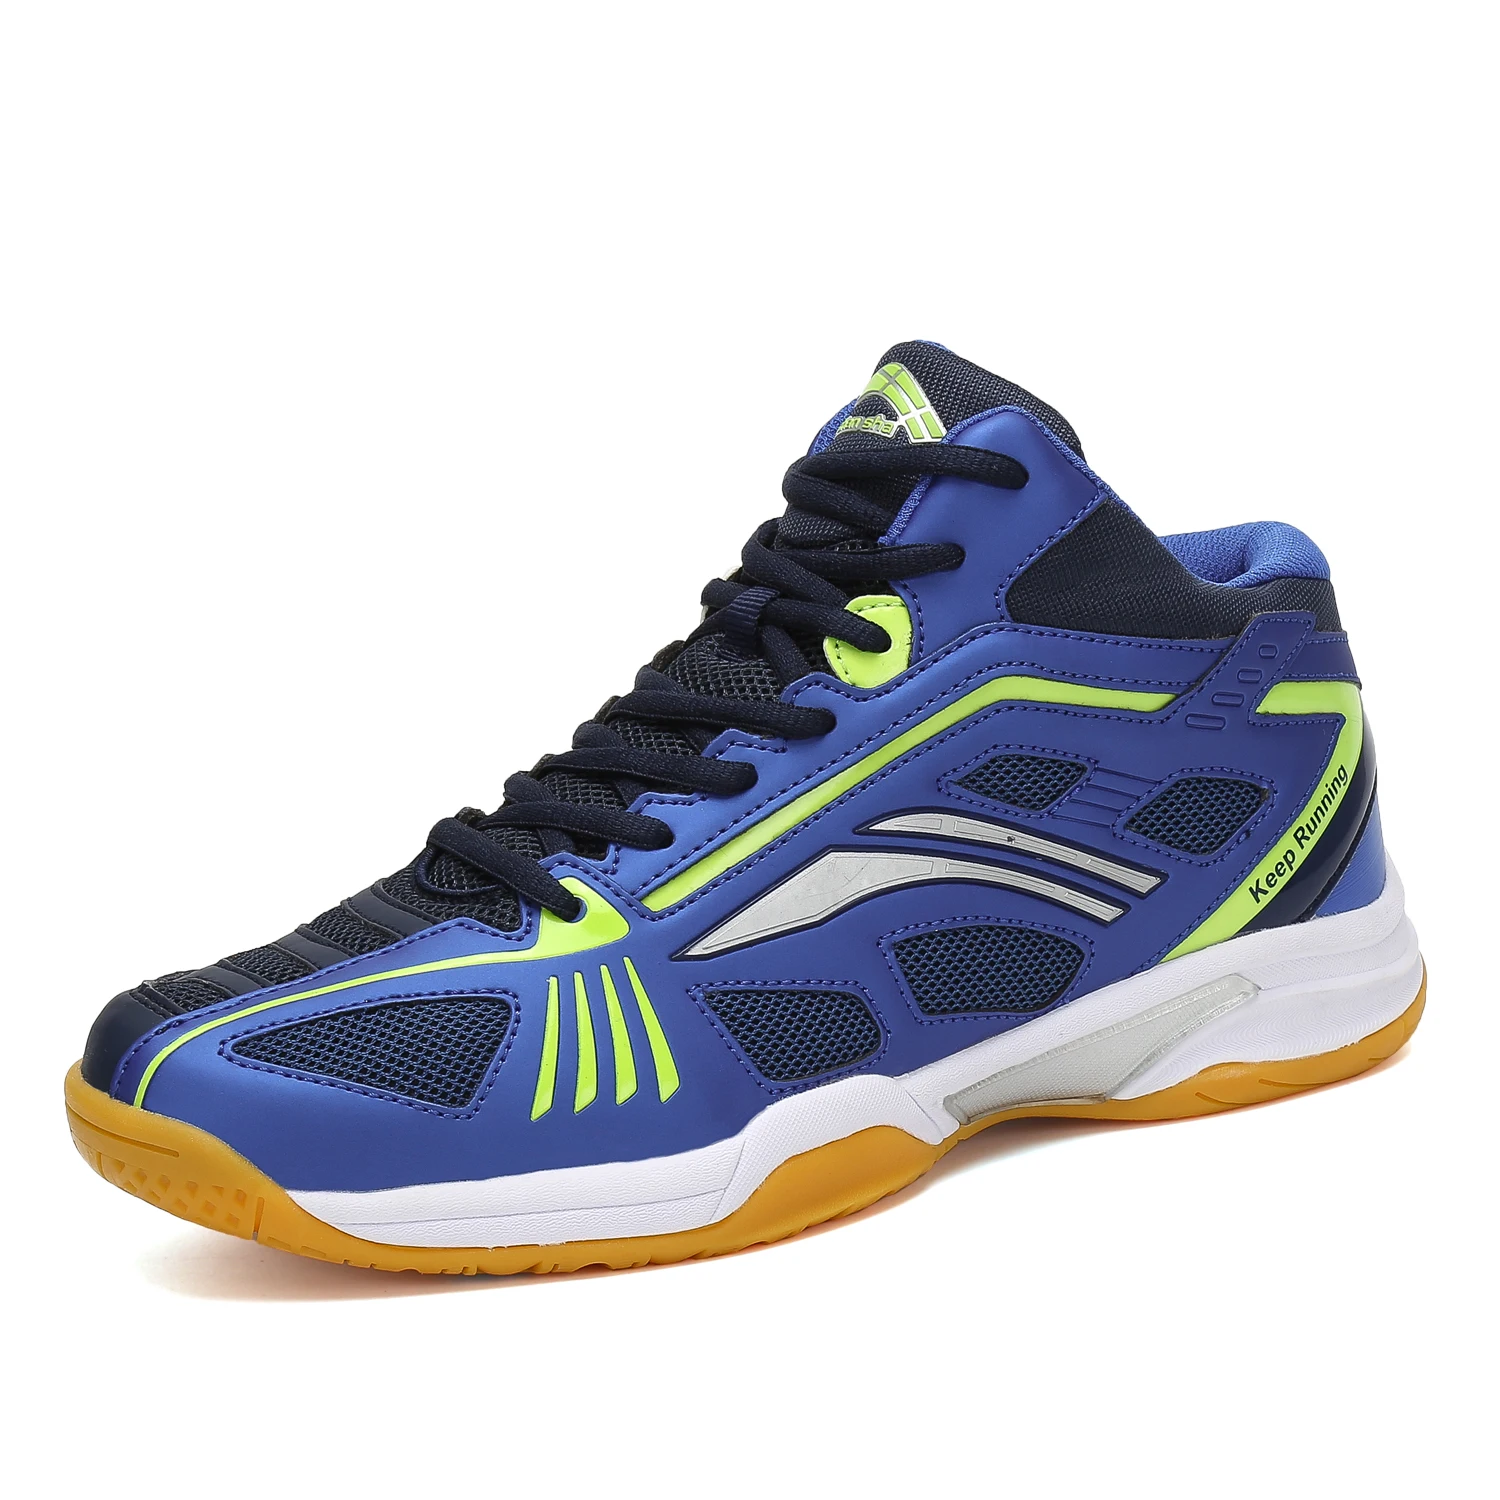 

Men's Badminton Shoes Cross Training Volleyball Tennis Sport Casual Shoes, Blue/white/yellow/orange